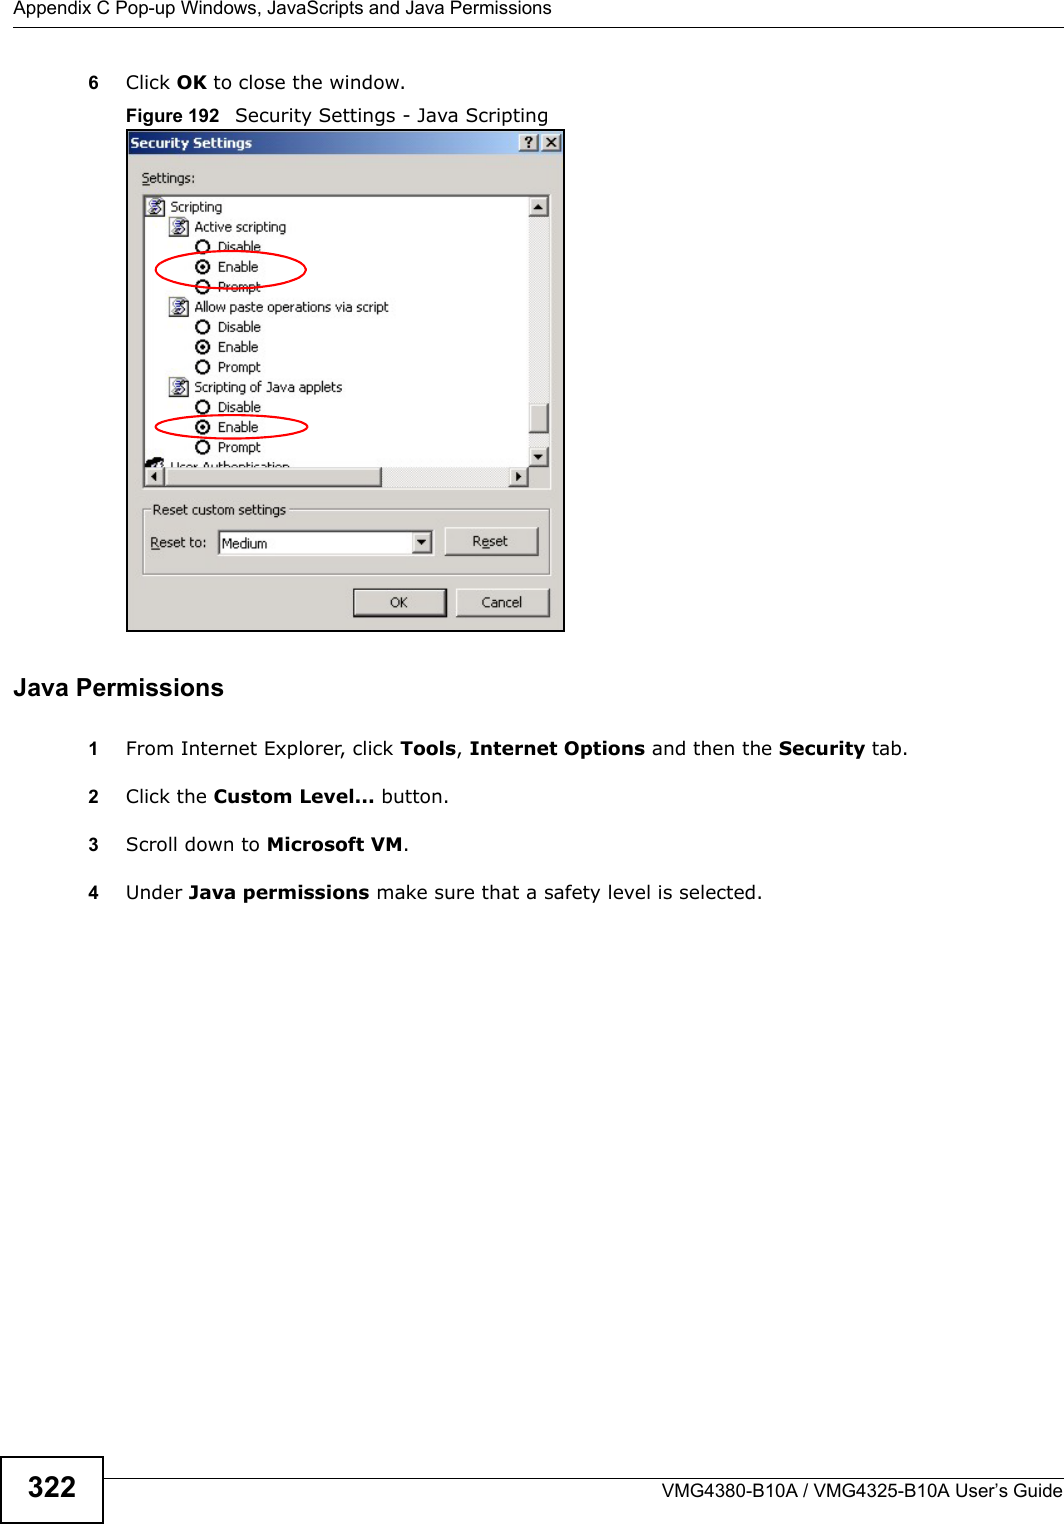 Appendix C Pop-up Windows, JavaScripts and Java PermissionsVMG4380-B10A / VMG4325-B10A User’s Guide3226Click OK to close the window.Figure 192   Security Settings - Java ScriptingJava Permissions1From Internet Explorer, click Tools, Internet Options and then the Security tab.2Click the Custom Level... button.3Scroll down to Microsoft VM. 4Under Java permissions make sure that a safety level is selected.